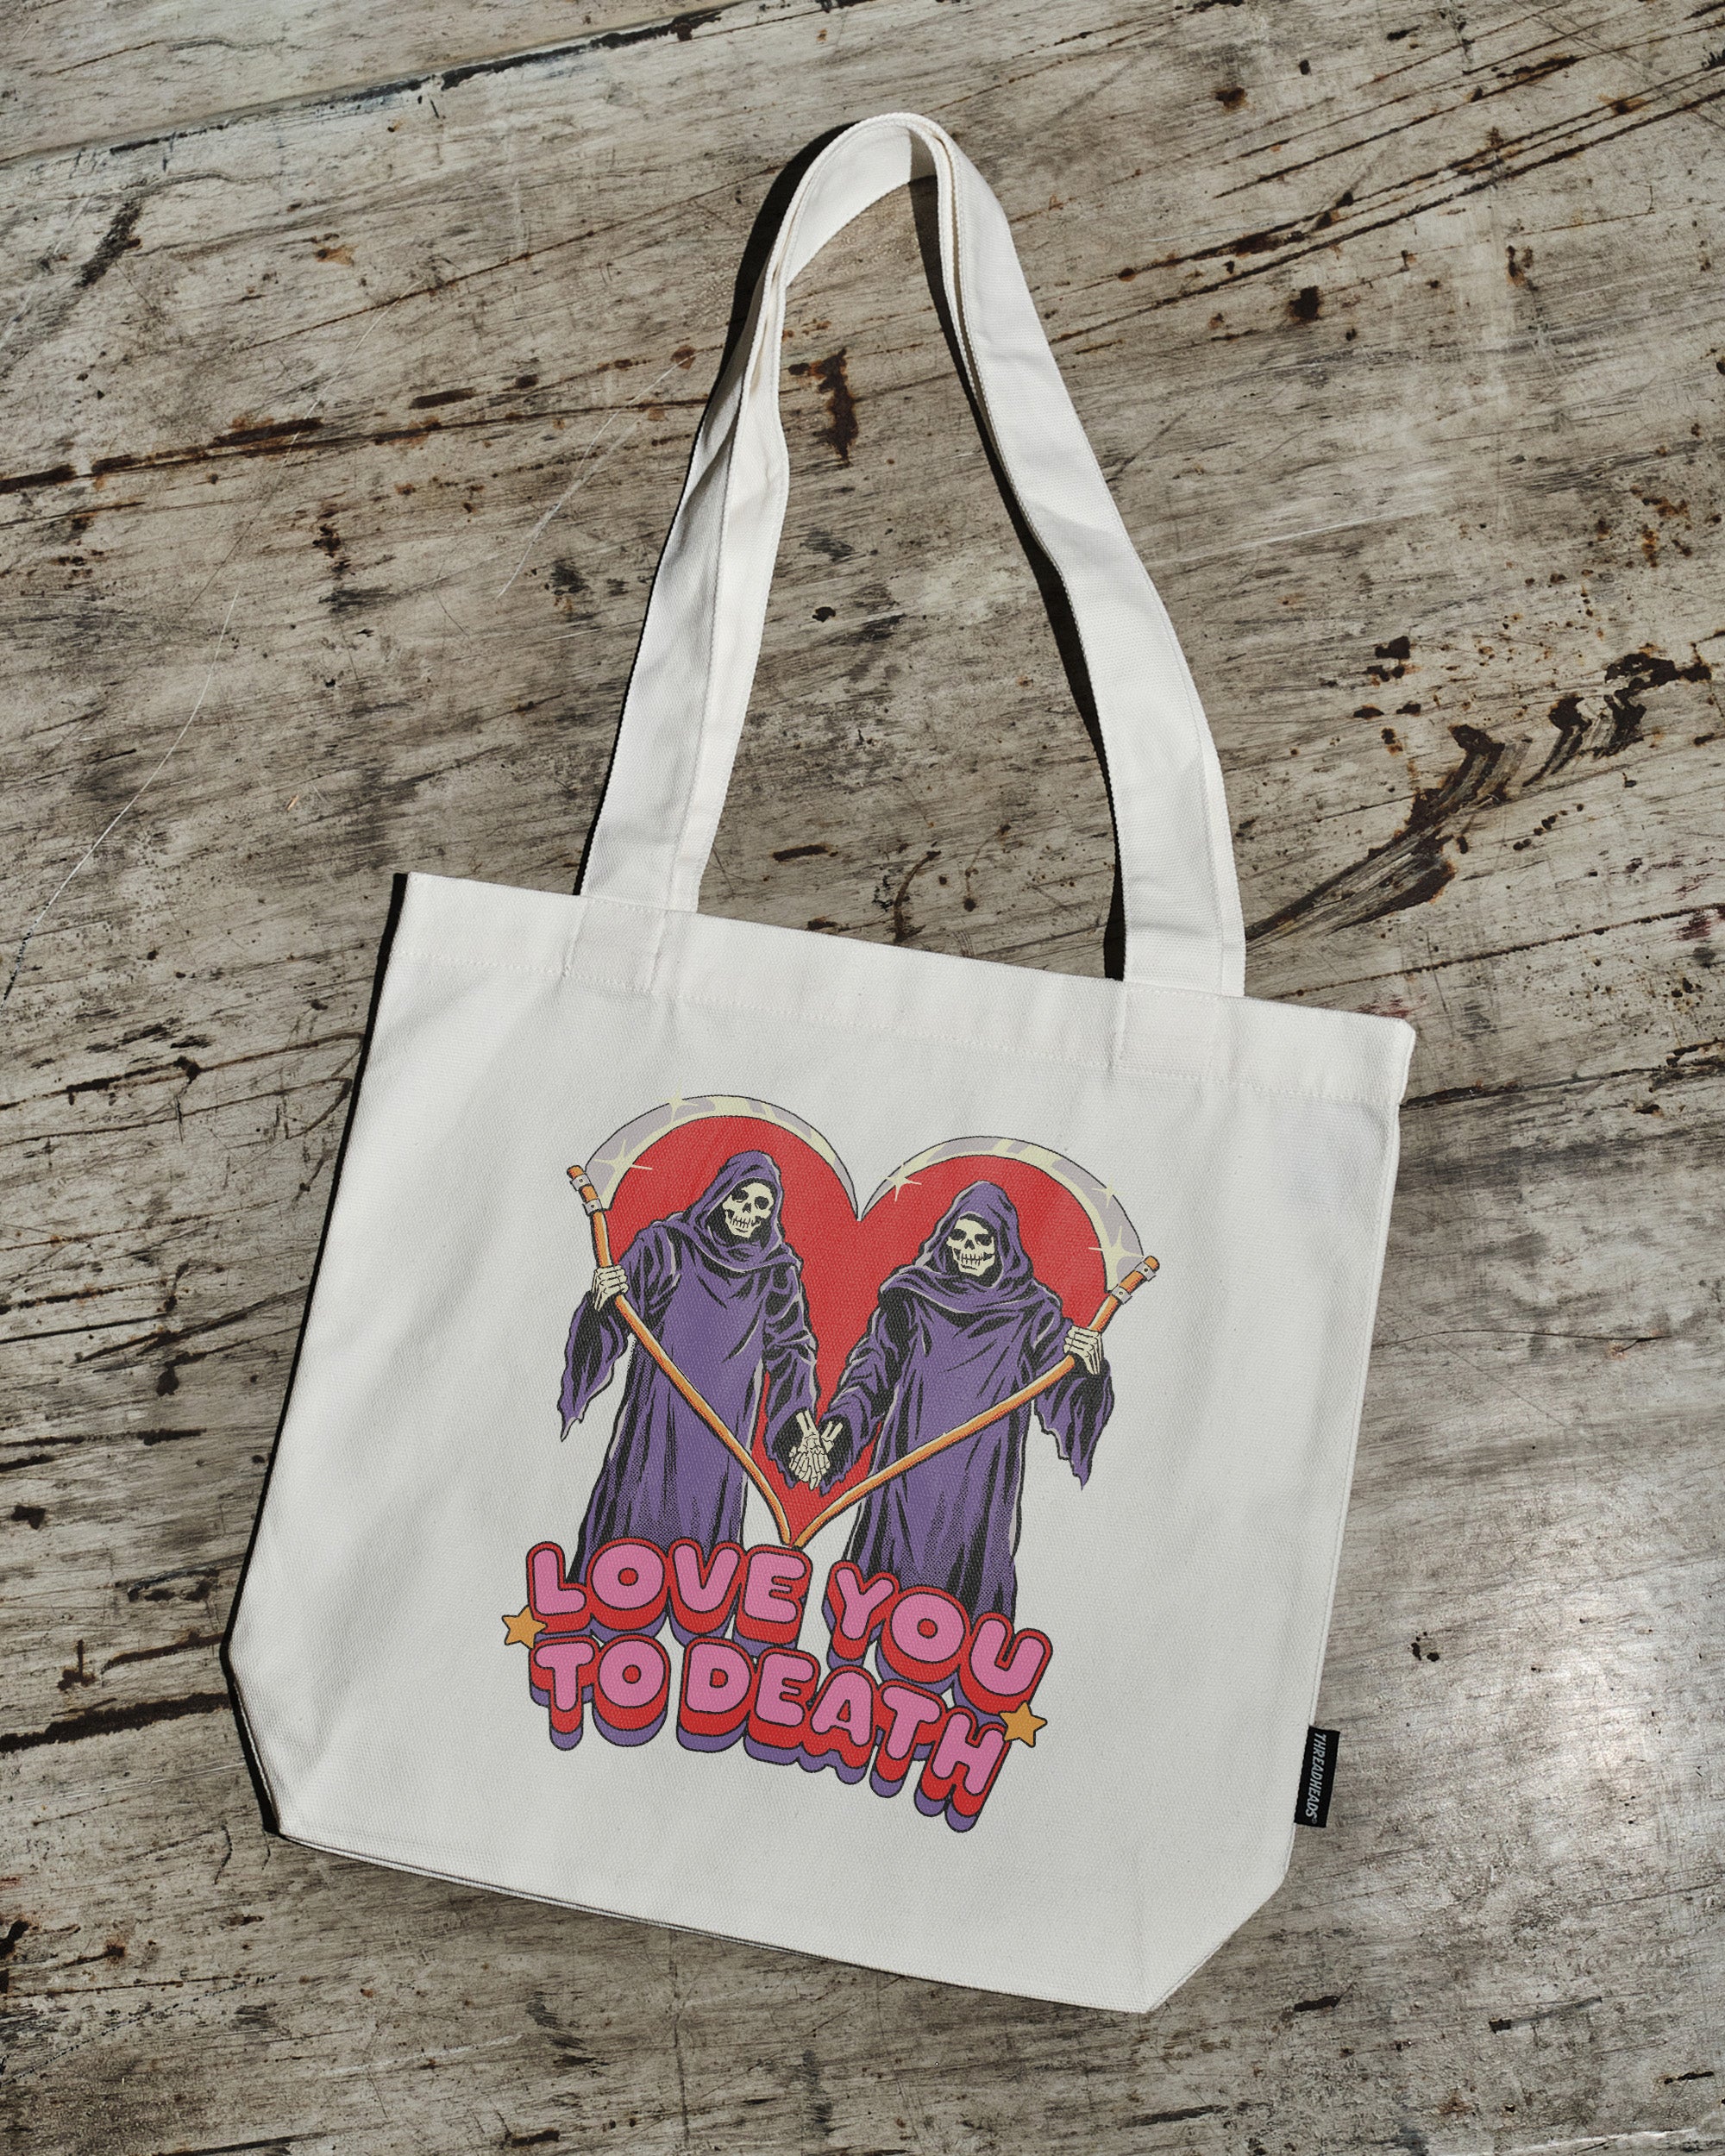 Love You To Death Tote Bag